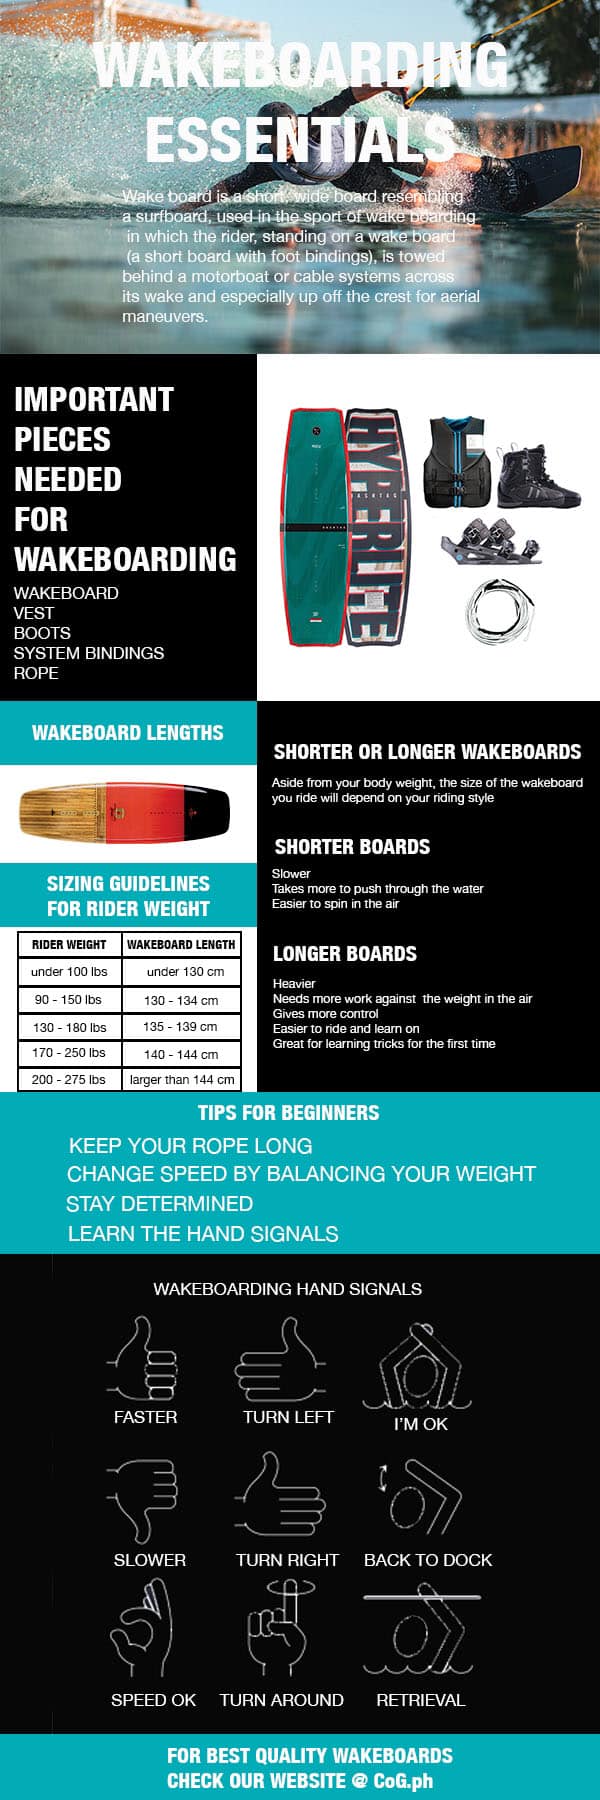 Important Pieces Needed for Wakeboarding